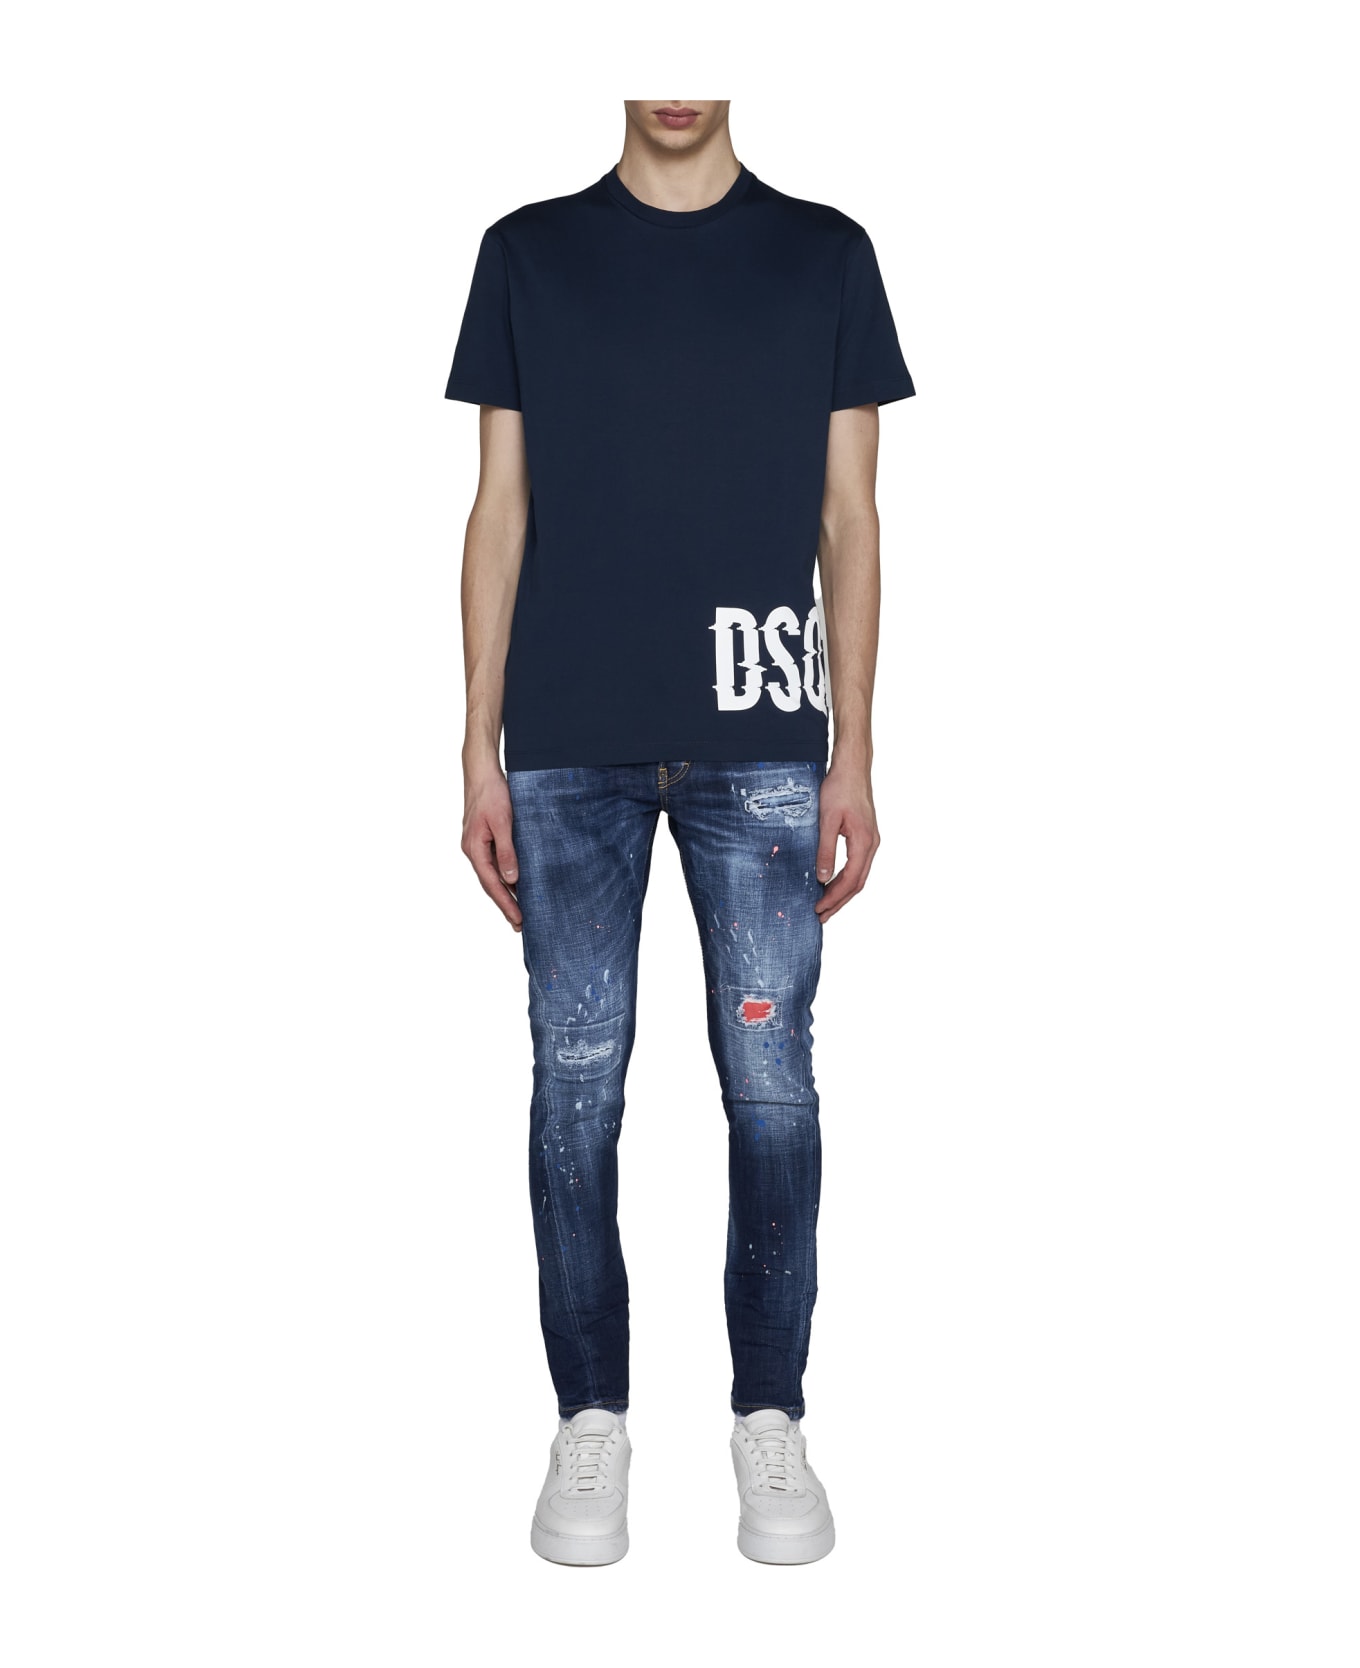 Dsquared2 Sexy Twist Jeans - Navy blue